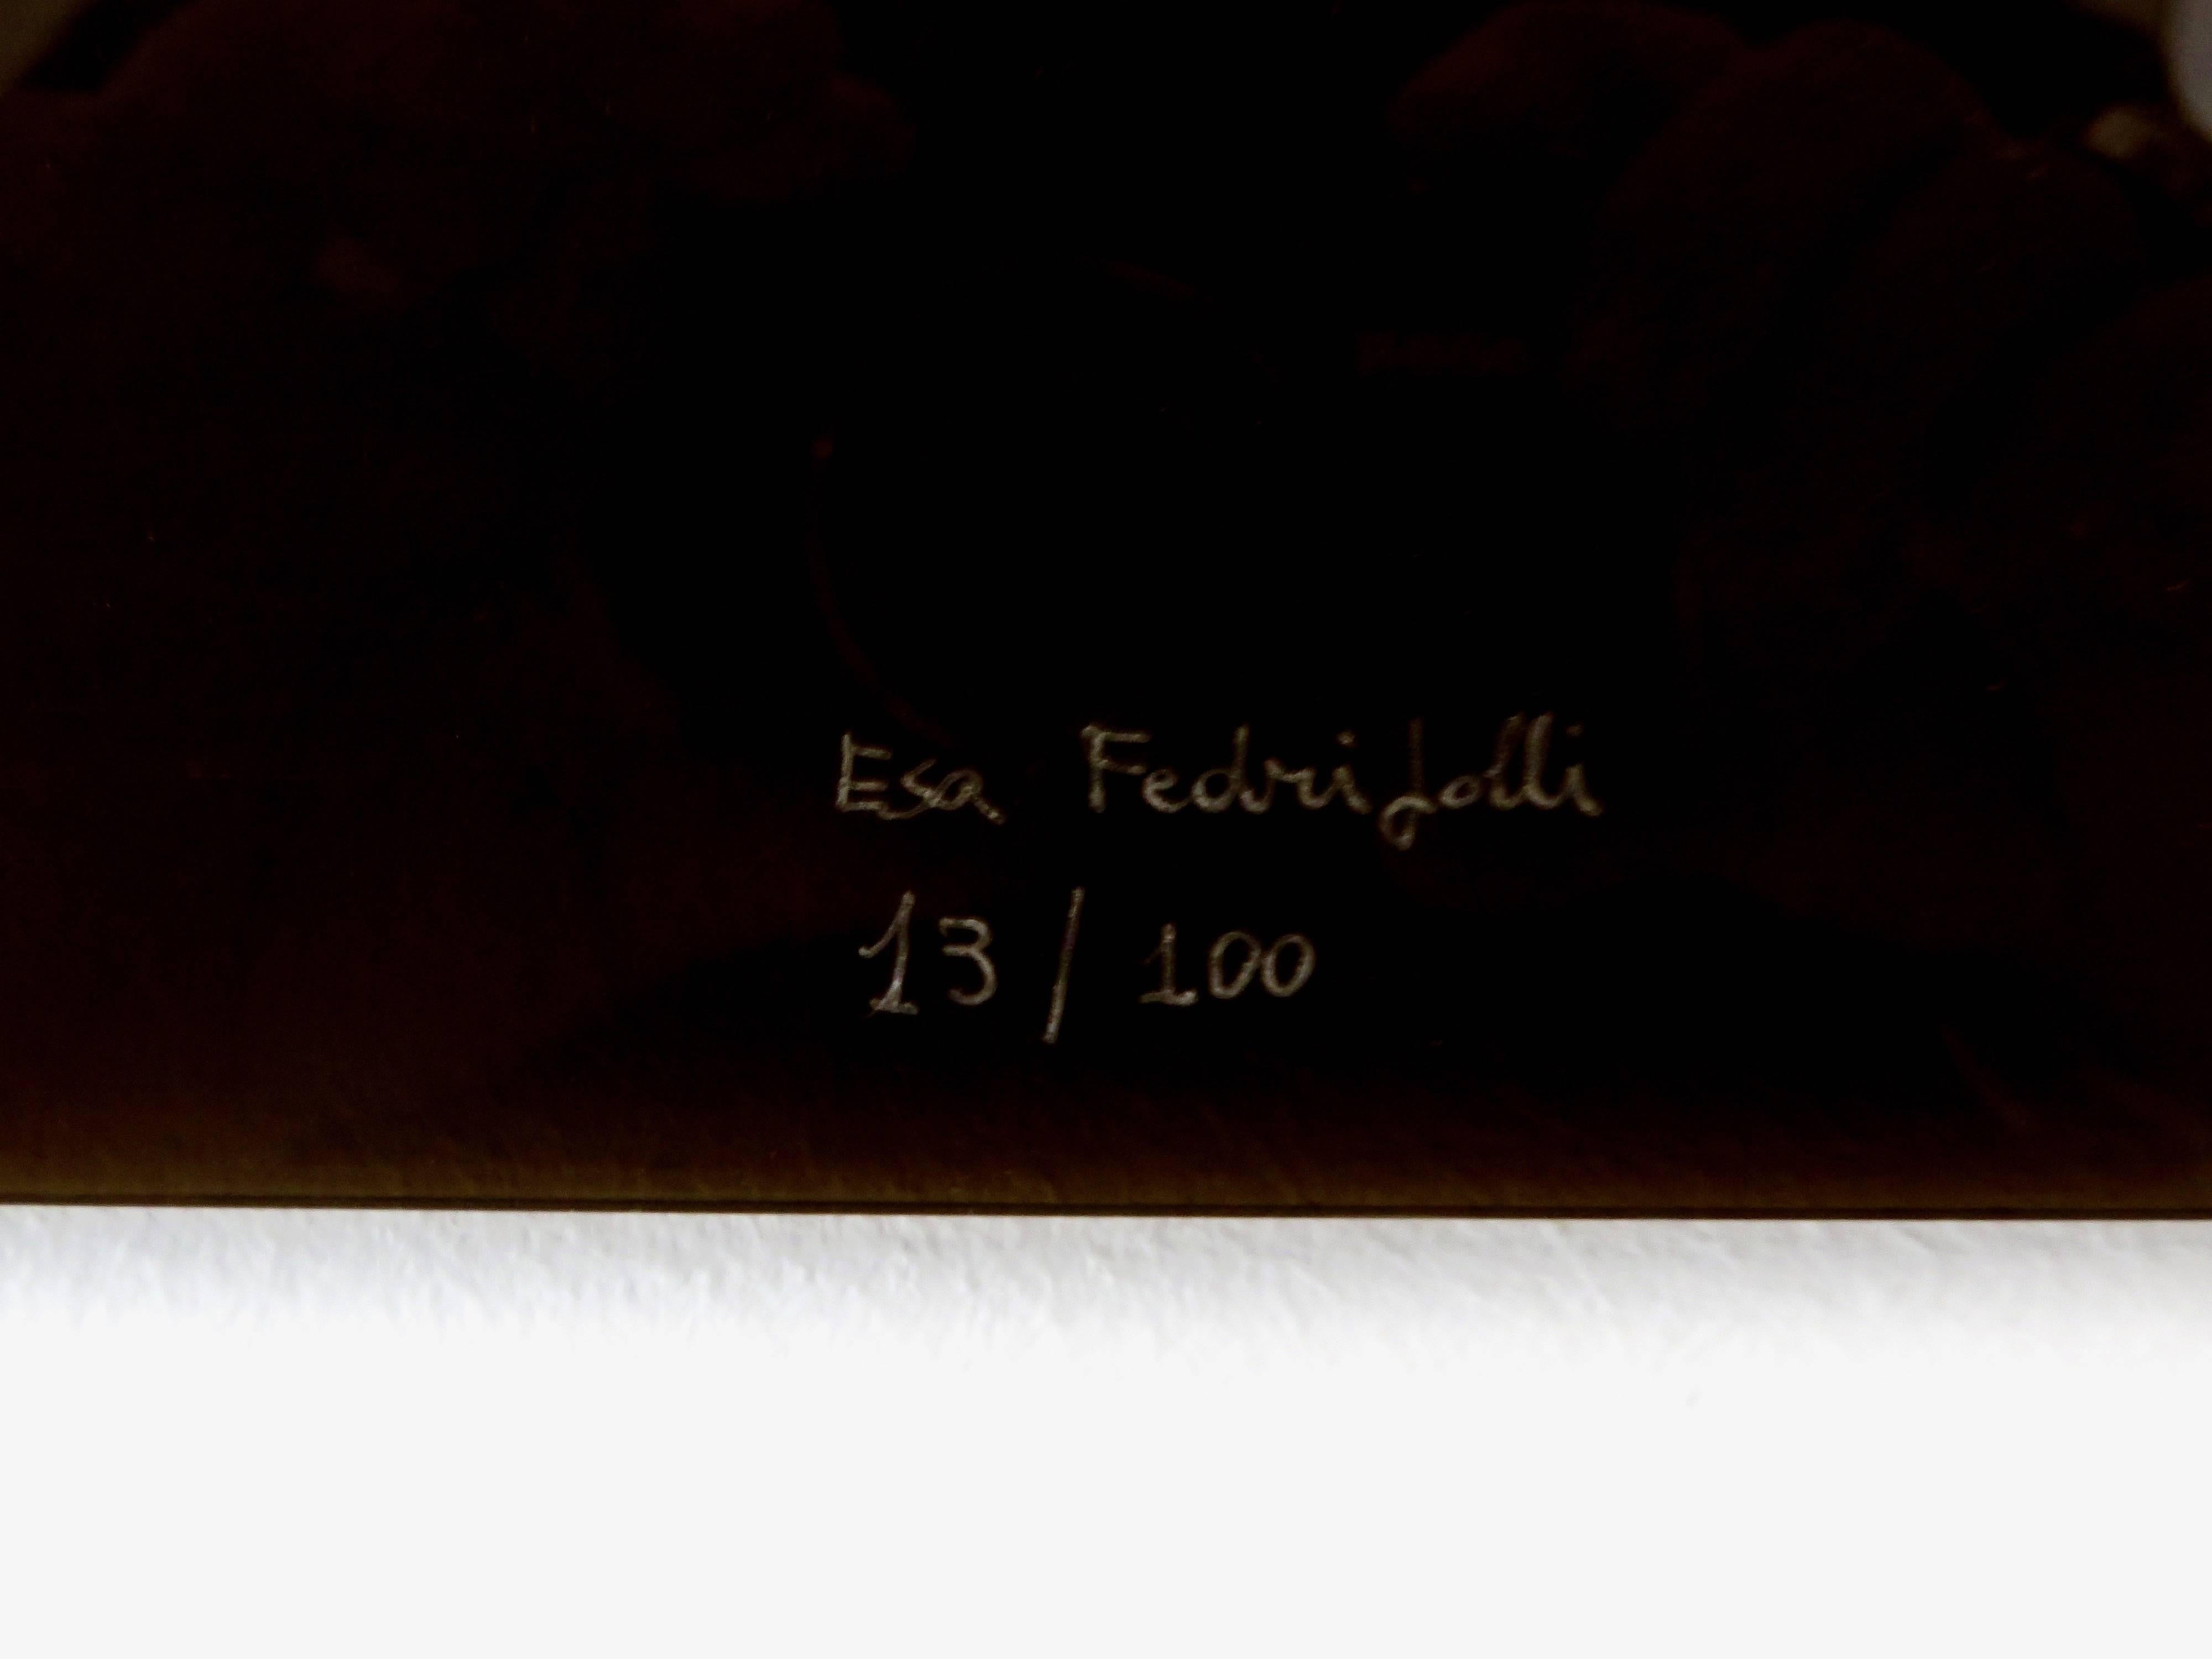 Bronze Wall Painting Sculptures by Esa Fedrigolli Italy 1985 Signed Numbered 6